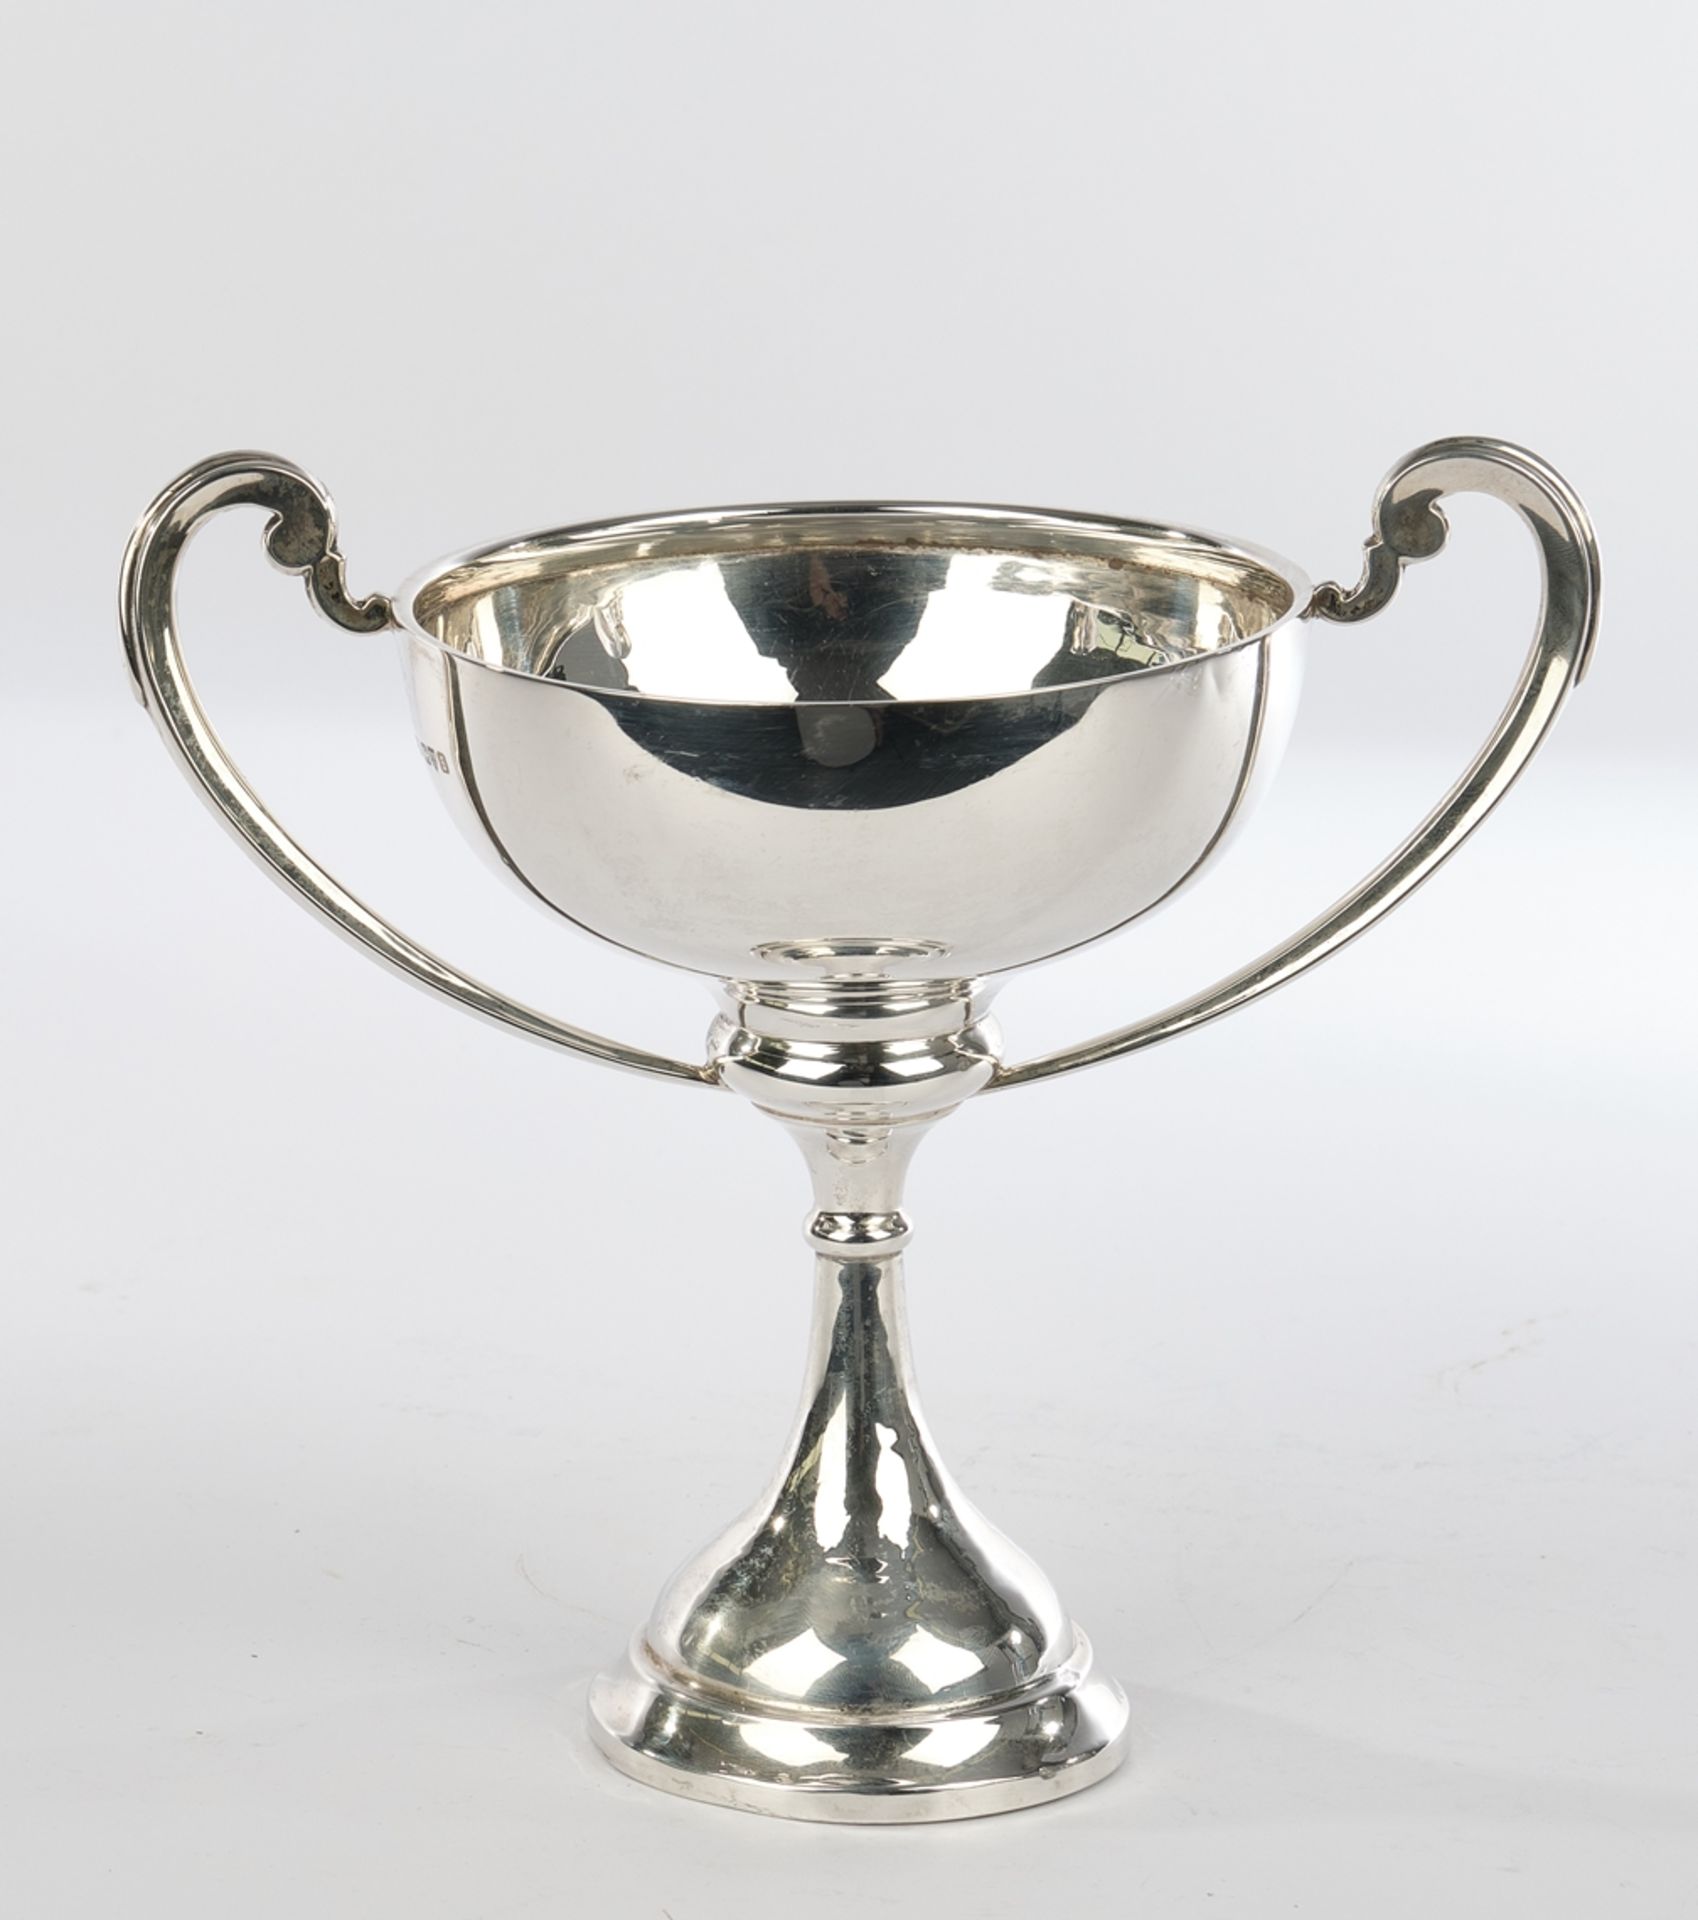 Cup, silver 925, Chester, 1934, S. Blanckensee & Son Ltd, smooth, two raised handles, swivelled, ap